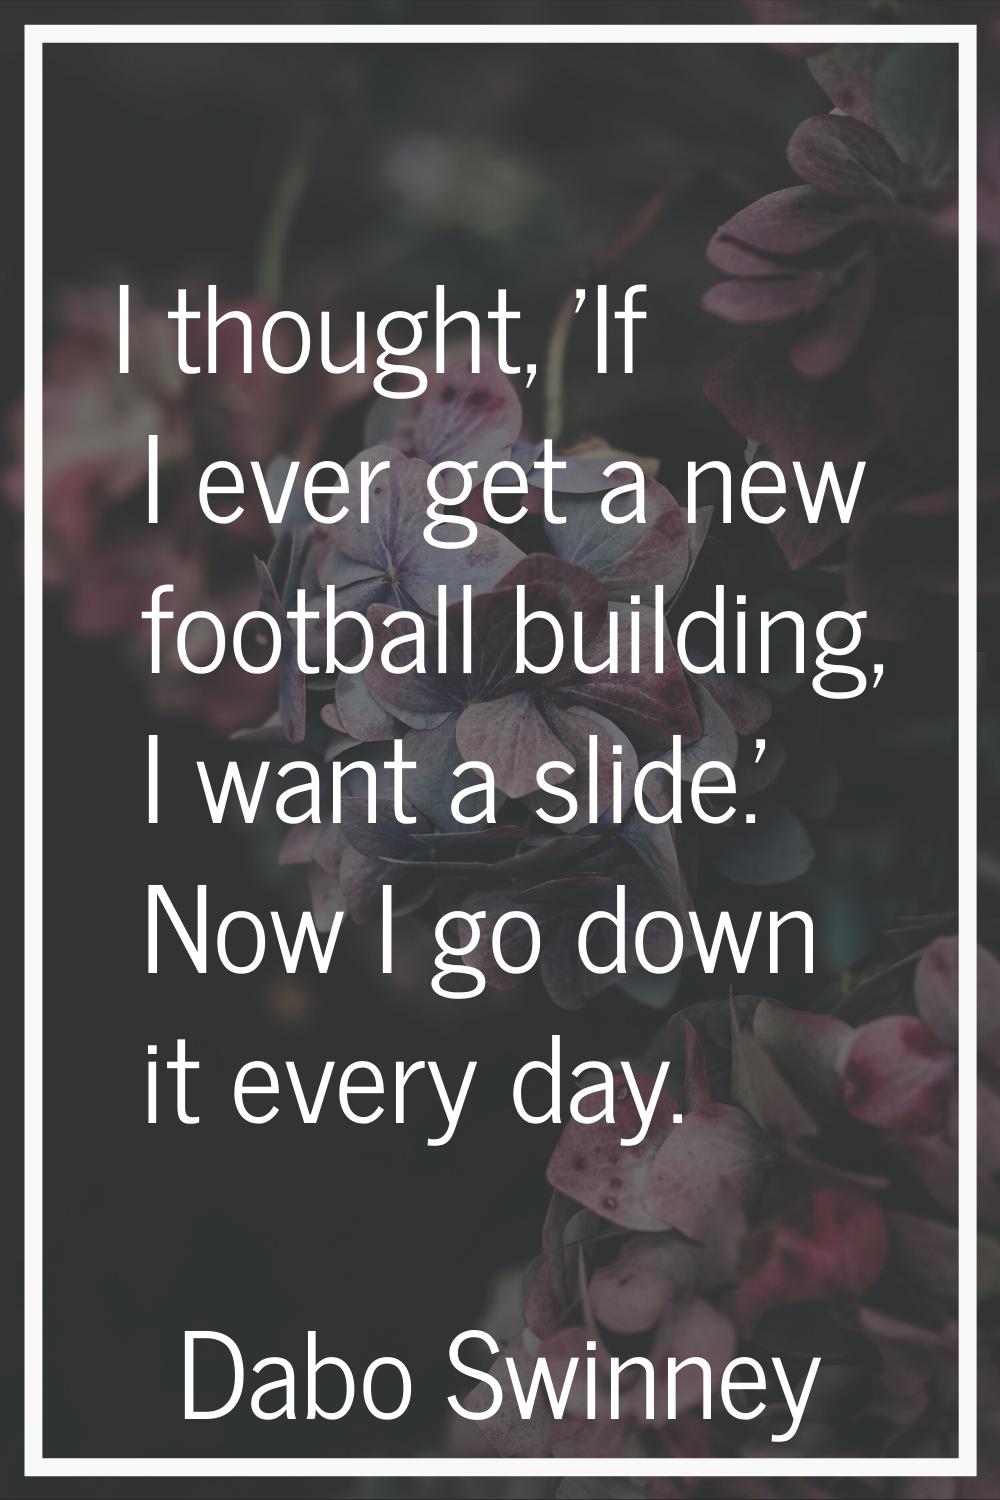 I thought, 'If I ever get a new football building, I want a slide.' Now I go down it every day.